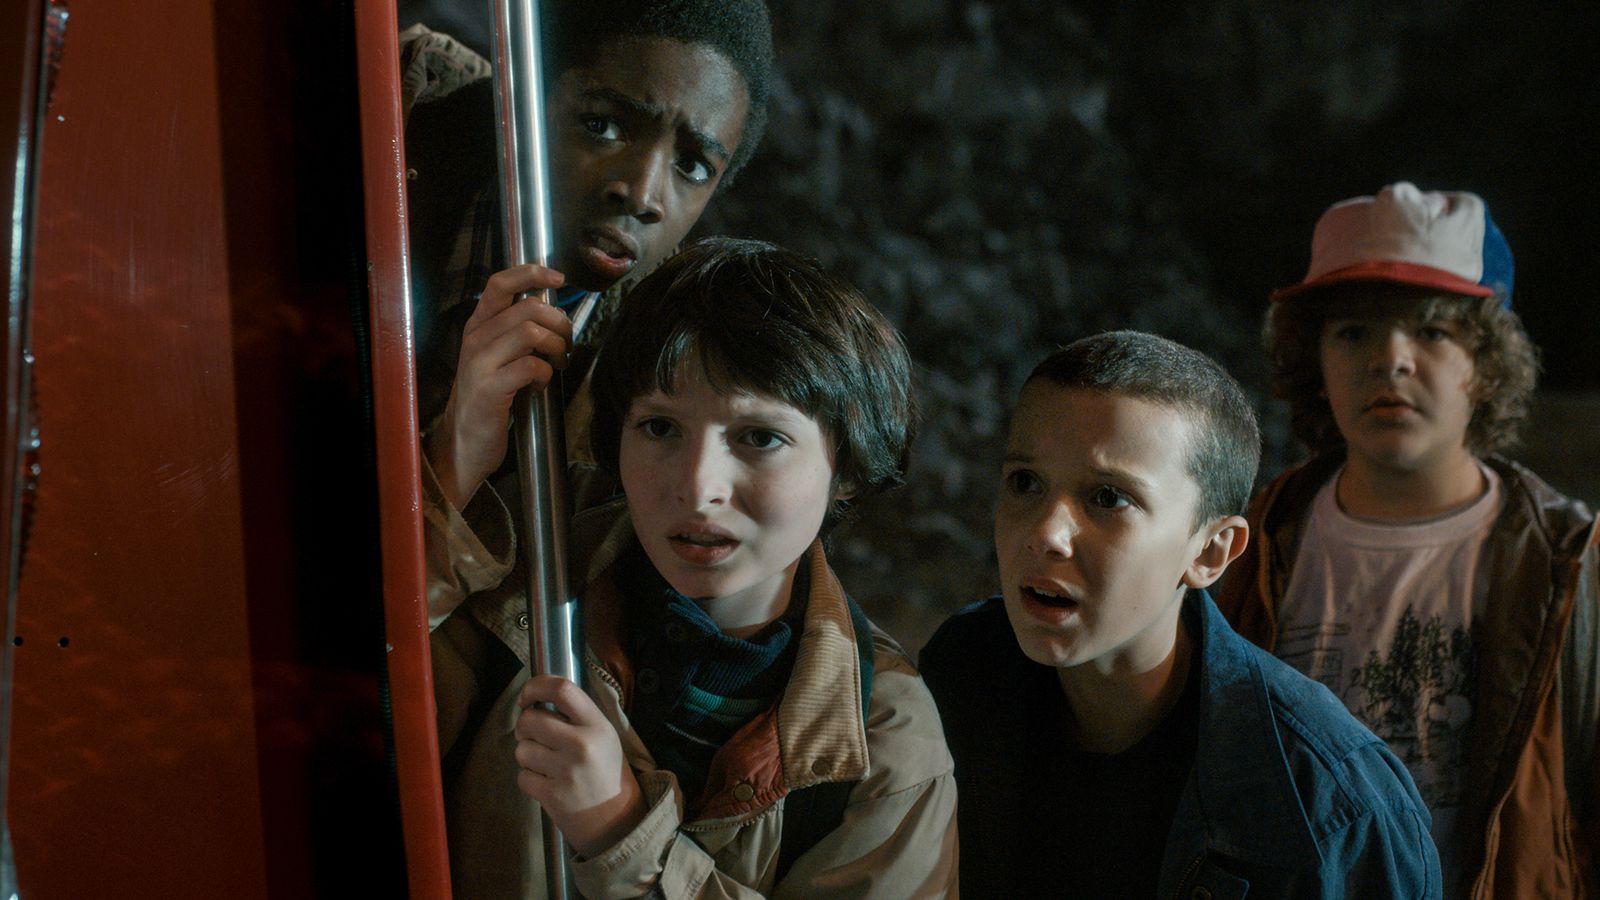 The "Stranger Things" kids as they search for their friend Will. Left to right: Lucas, portrayed by Caleb McLaughlin; Mike, portrayed by Finn Wolfhard; Eleven, portrayed by Millie Bobby Brown; Dustin, portrayed by Gaten Matarazzo. Photo courtesy of Netflix.